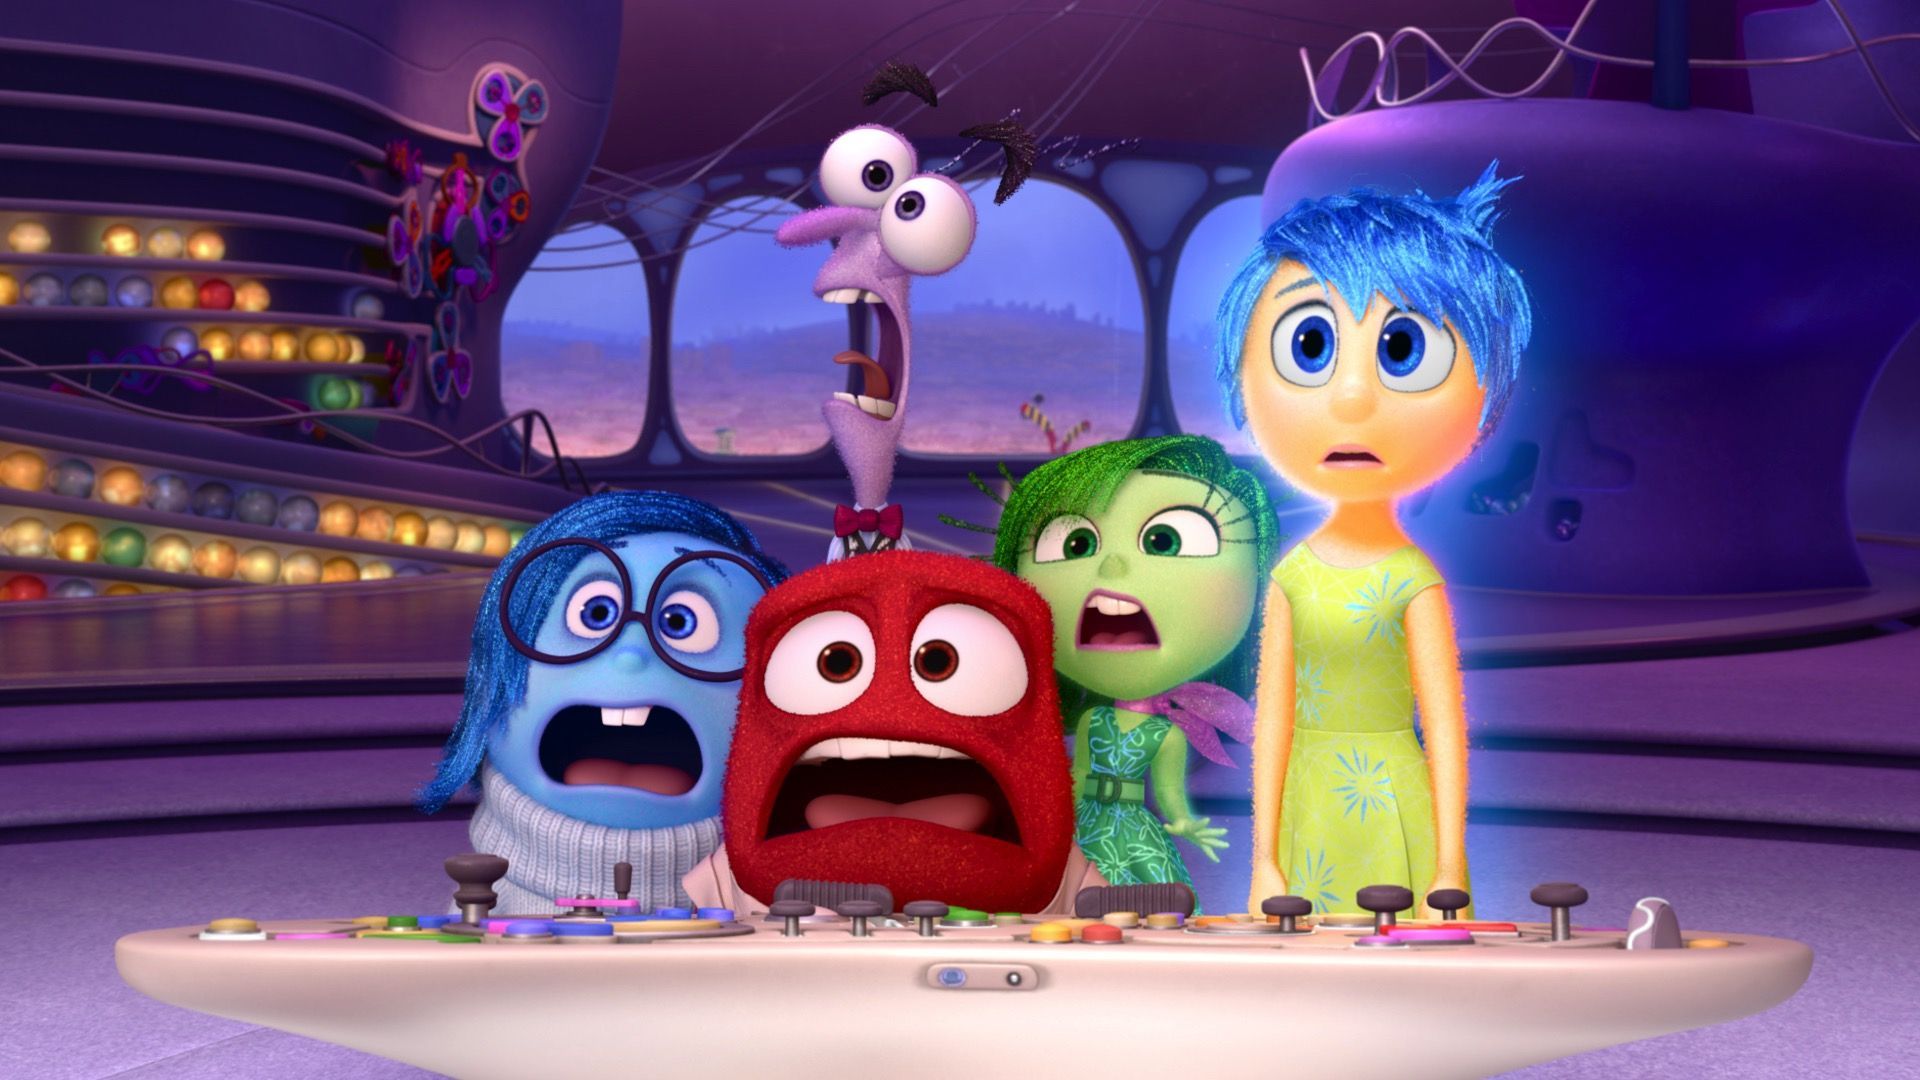 Disney Pixar’s Inside Out: The Outside Edition, all the “inside scenes” removed